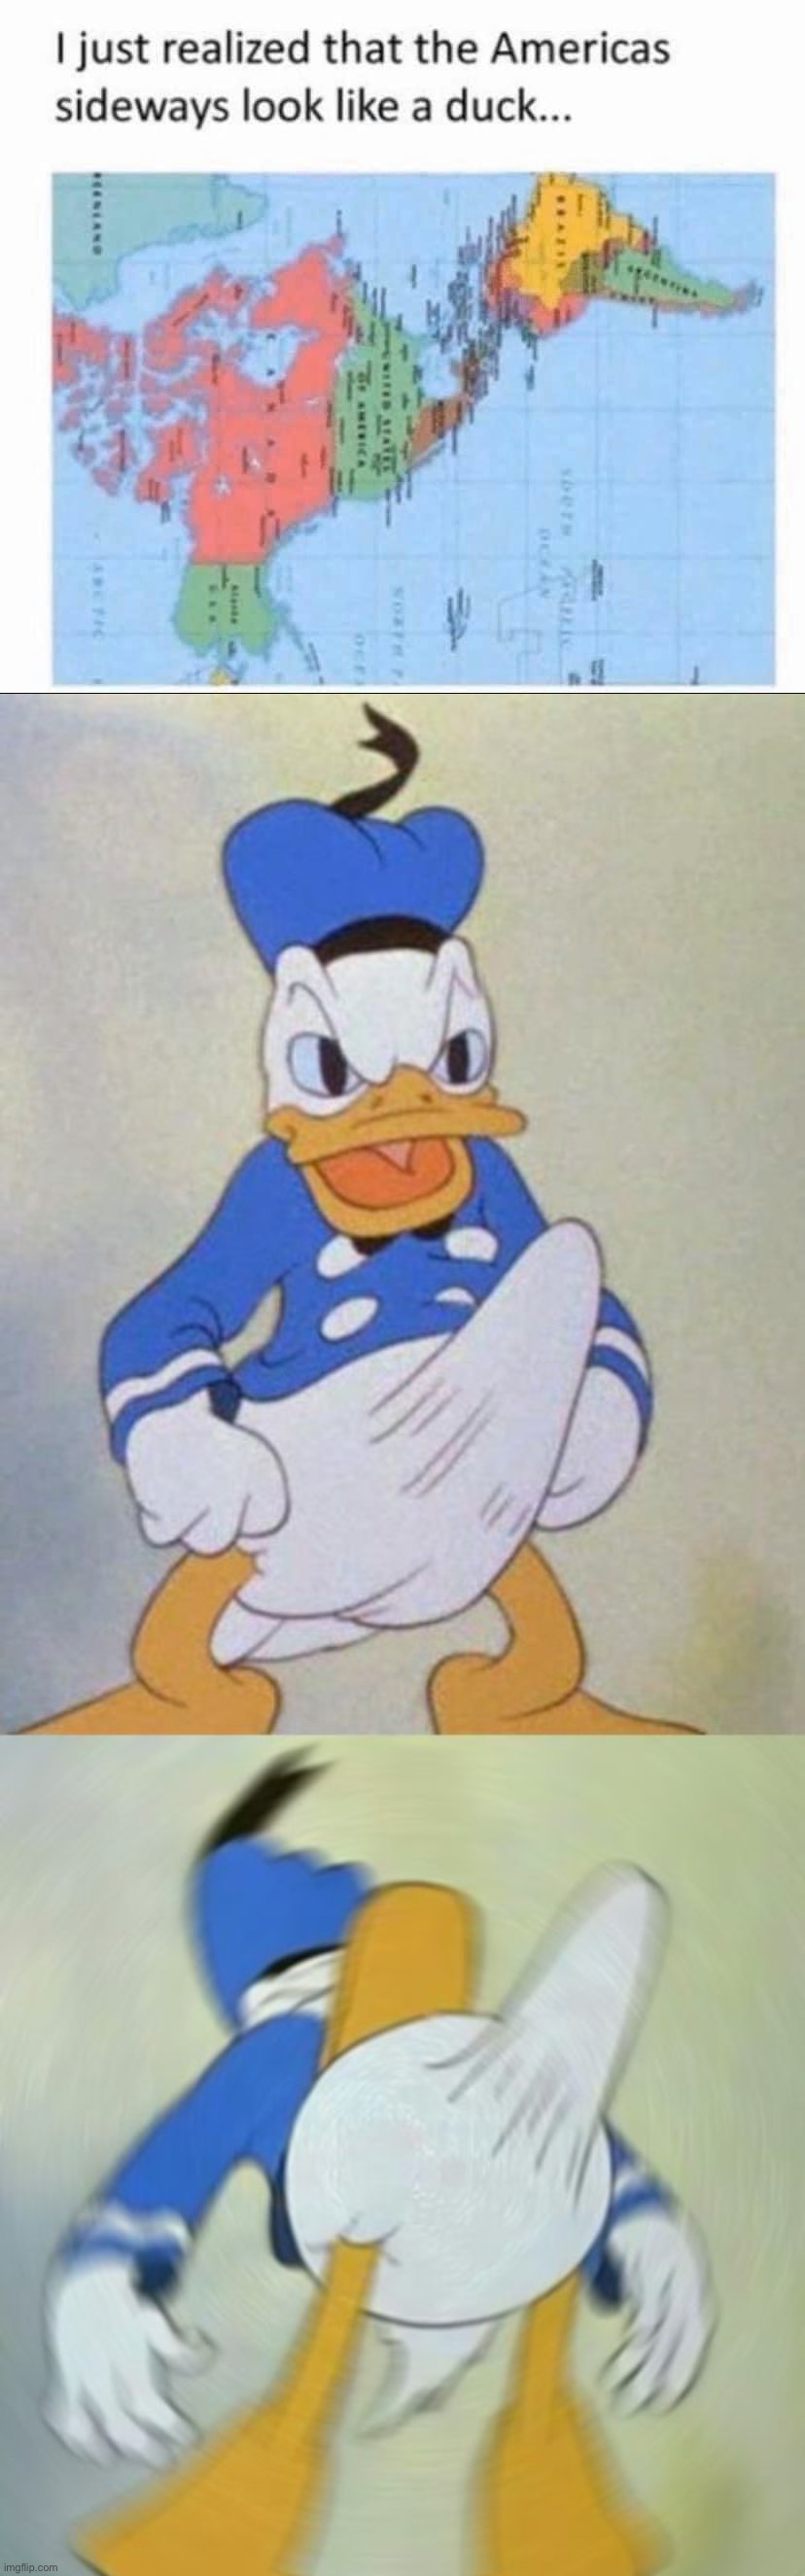 image tagged in america duck,donald duck boner | made w/ Imgflip meme maker